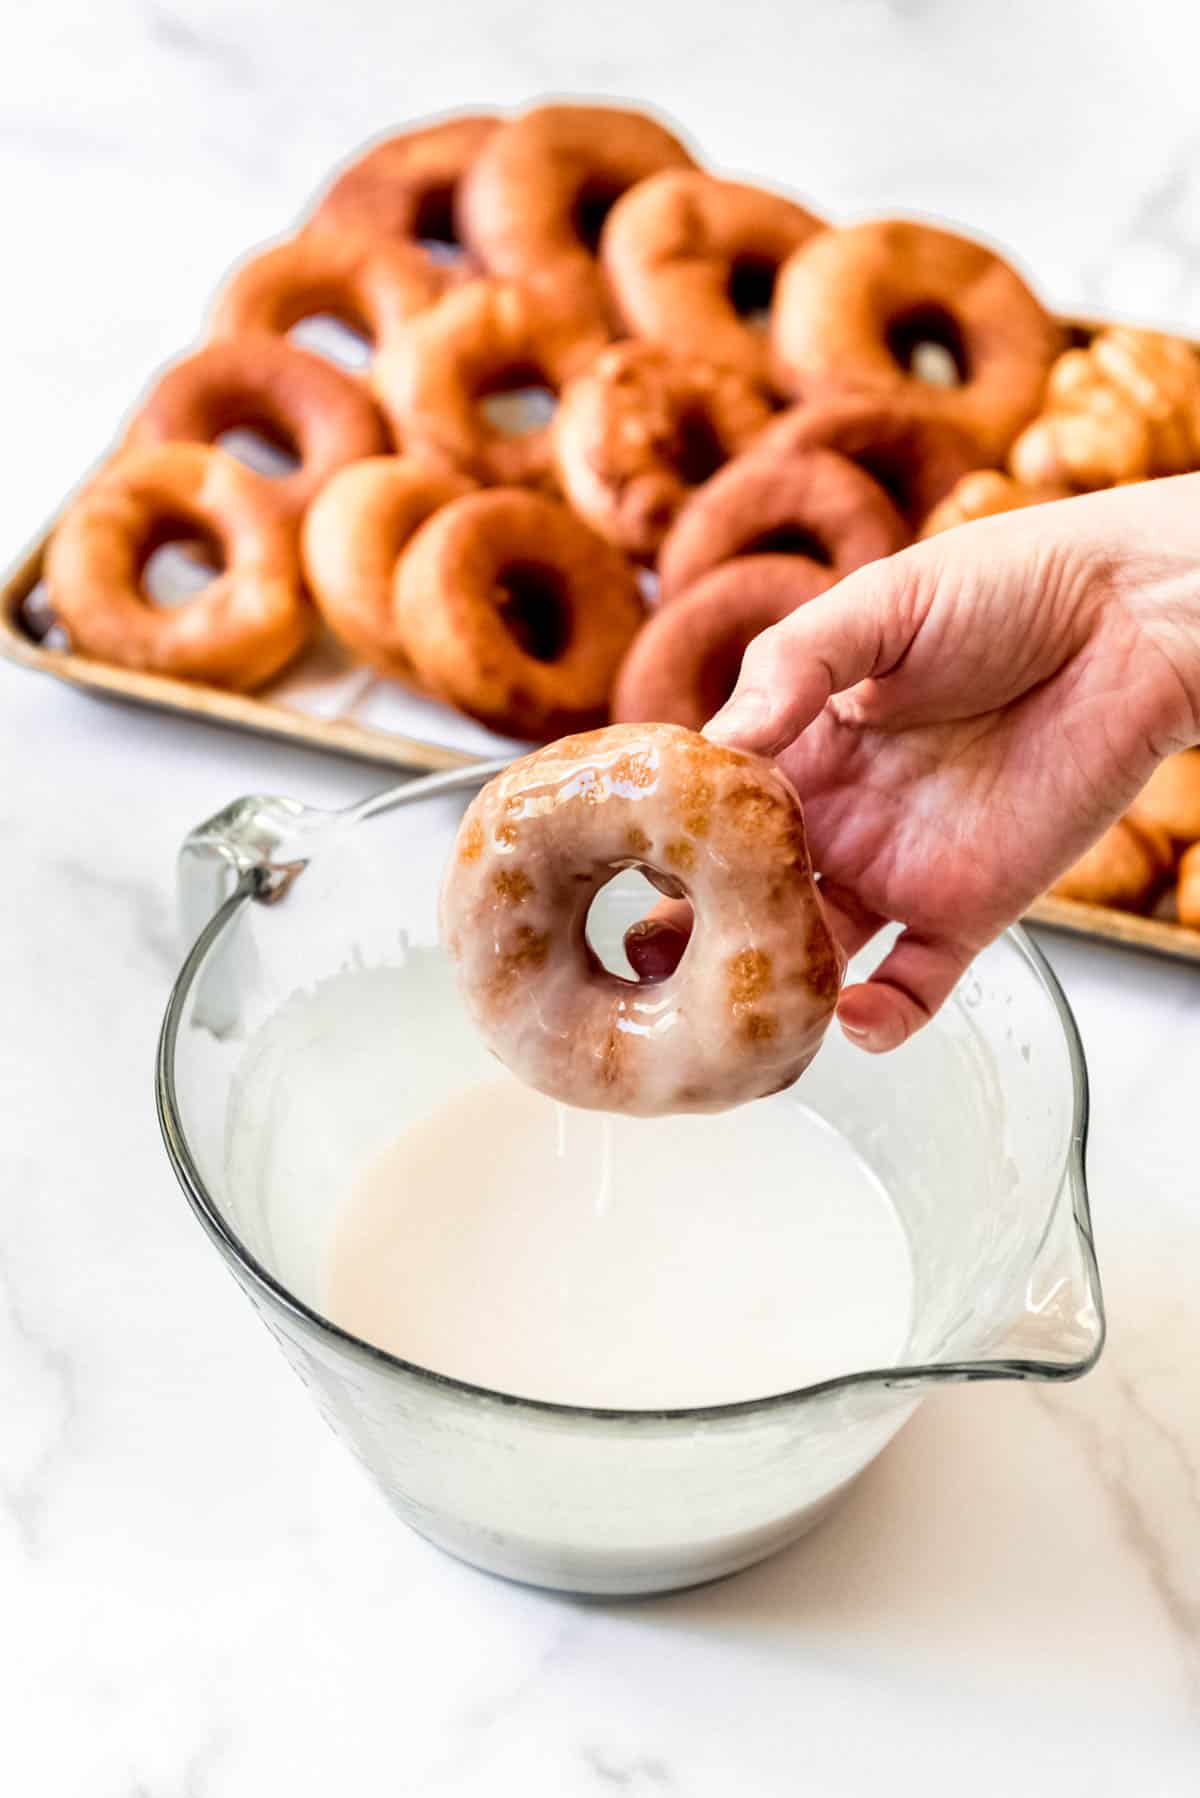 A freshly dipped glazed donut being held over the glaze.